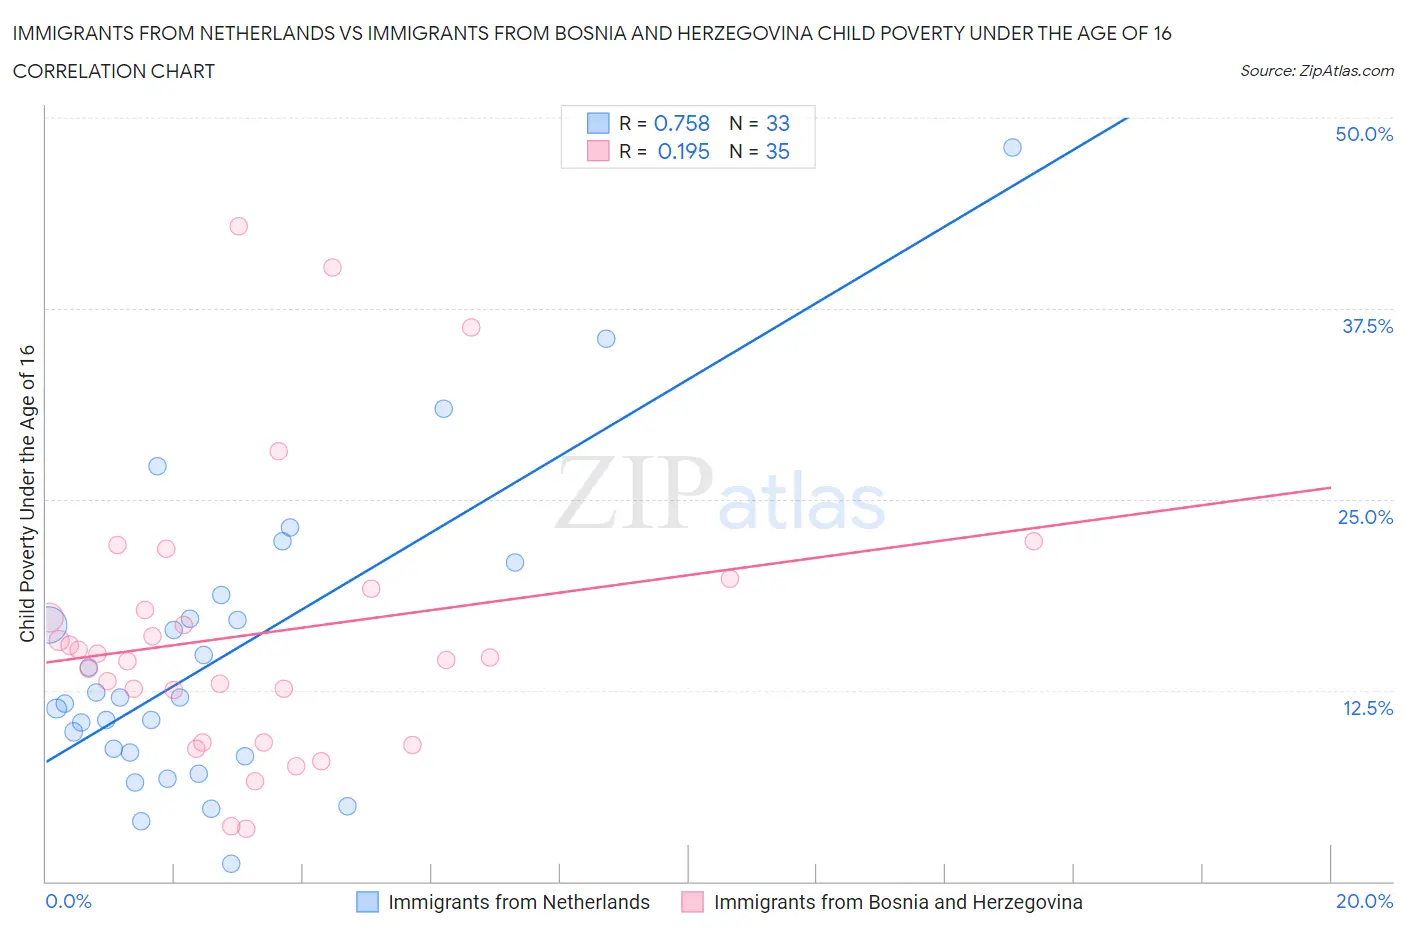 Immigrants from Netherlands vs Immigrants from Bosnia and Herzegovina Child Poverty Under the Age of 16